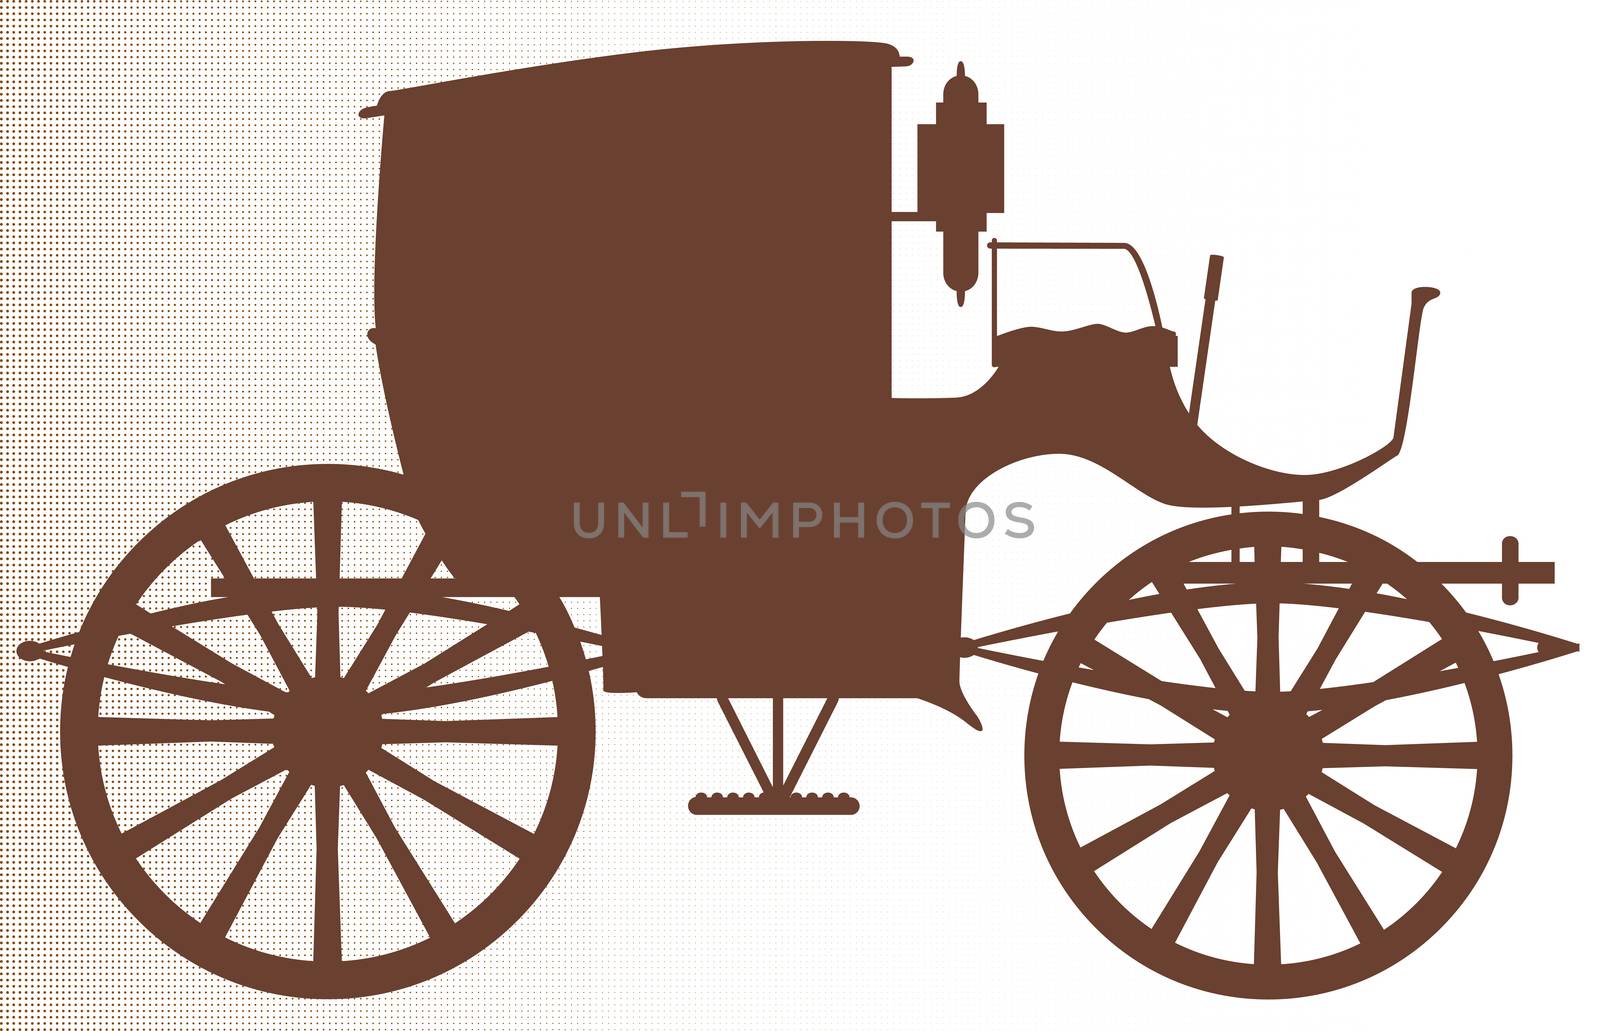 A typical Victorian or Georgian style carriage in silhouette over a halftone background